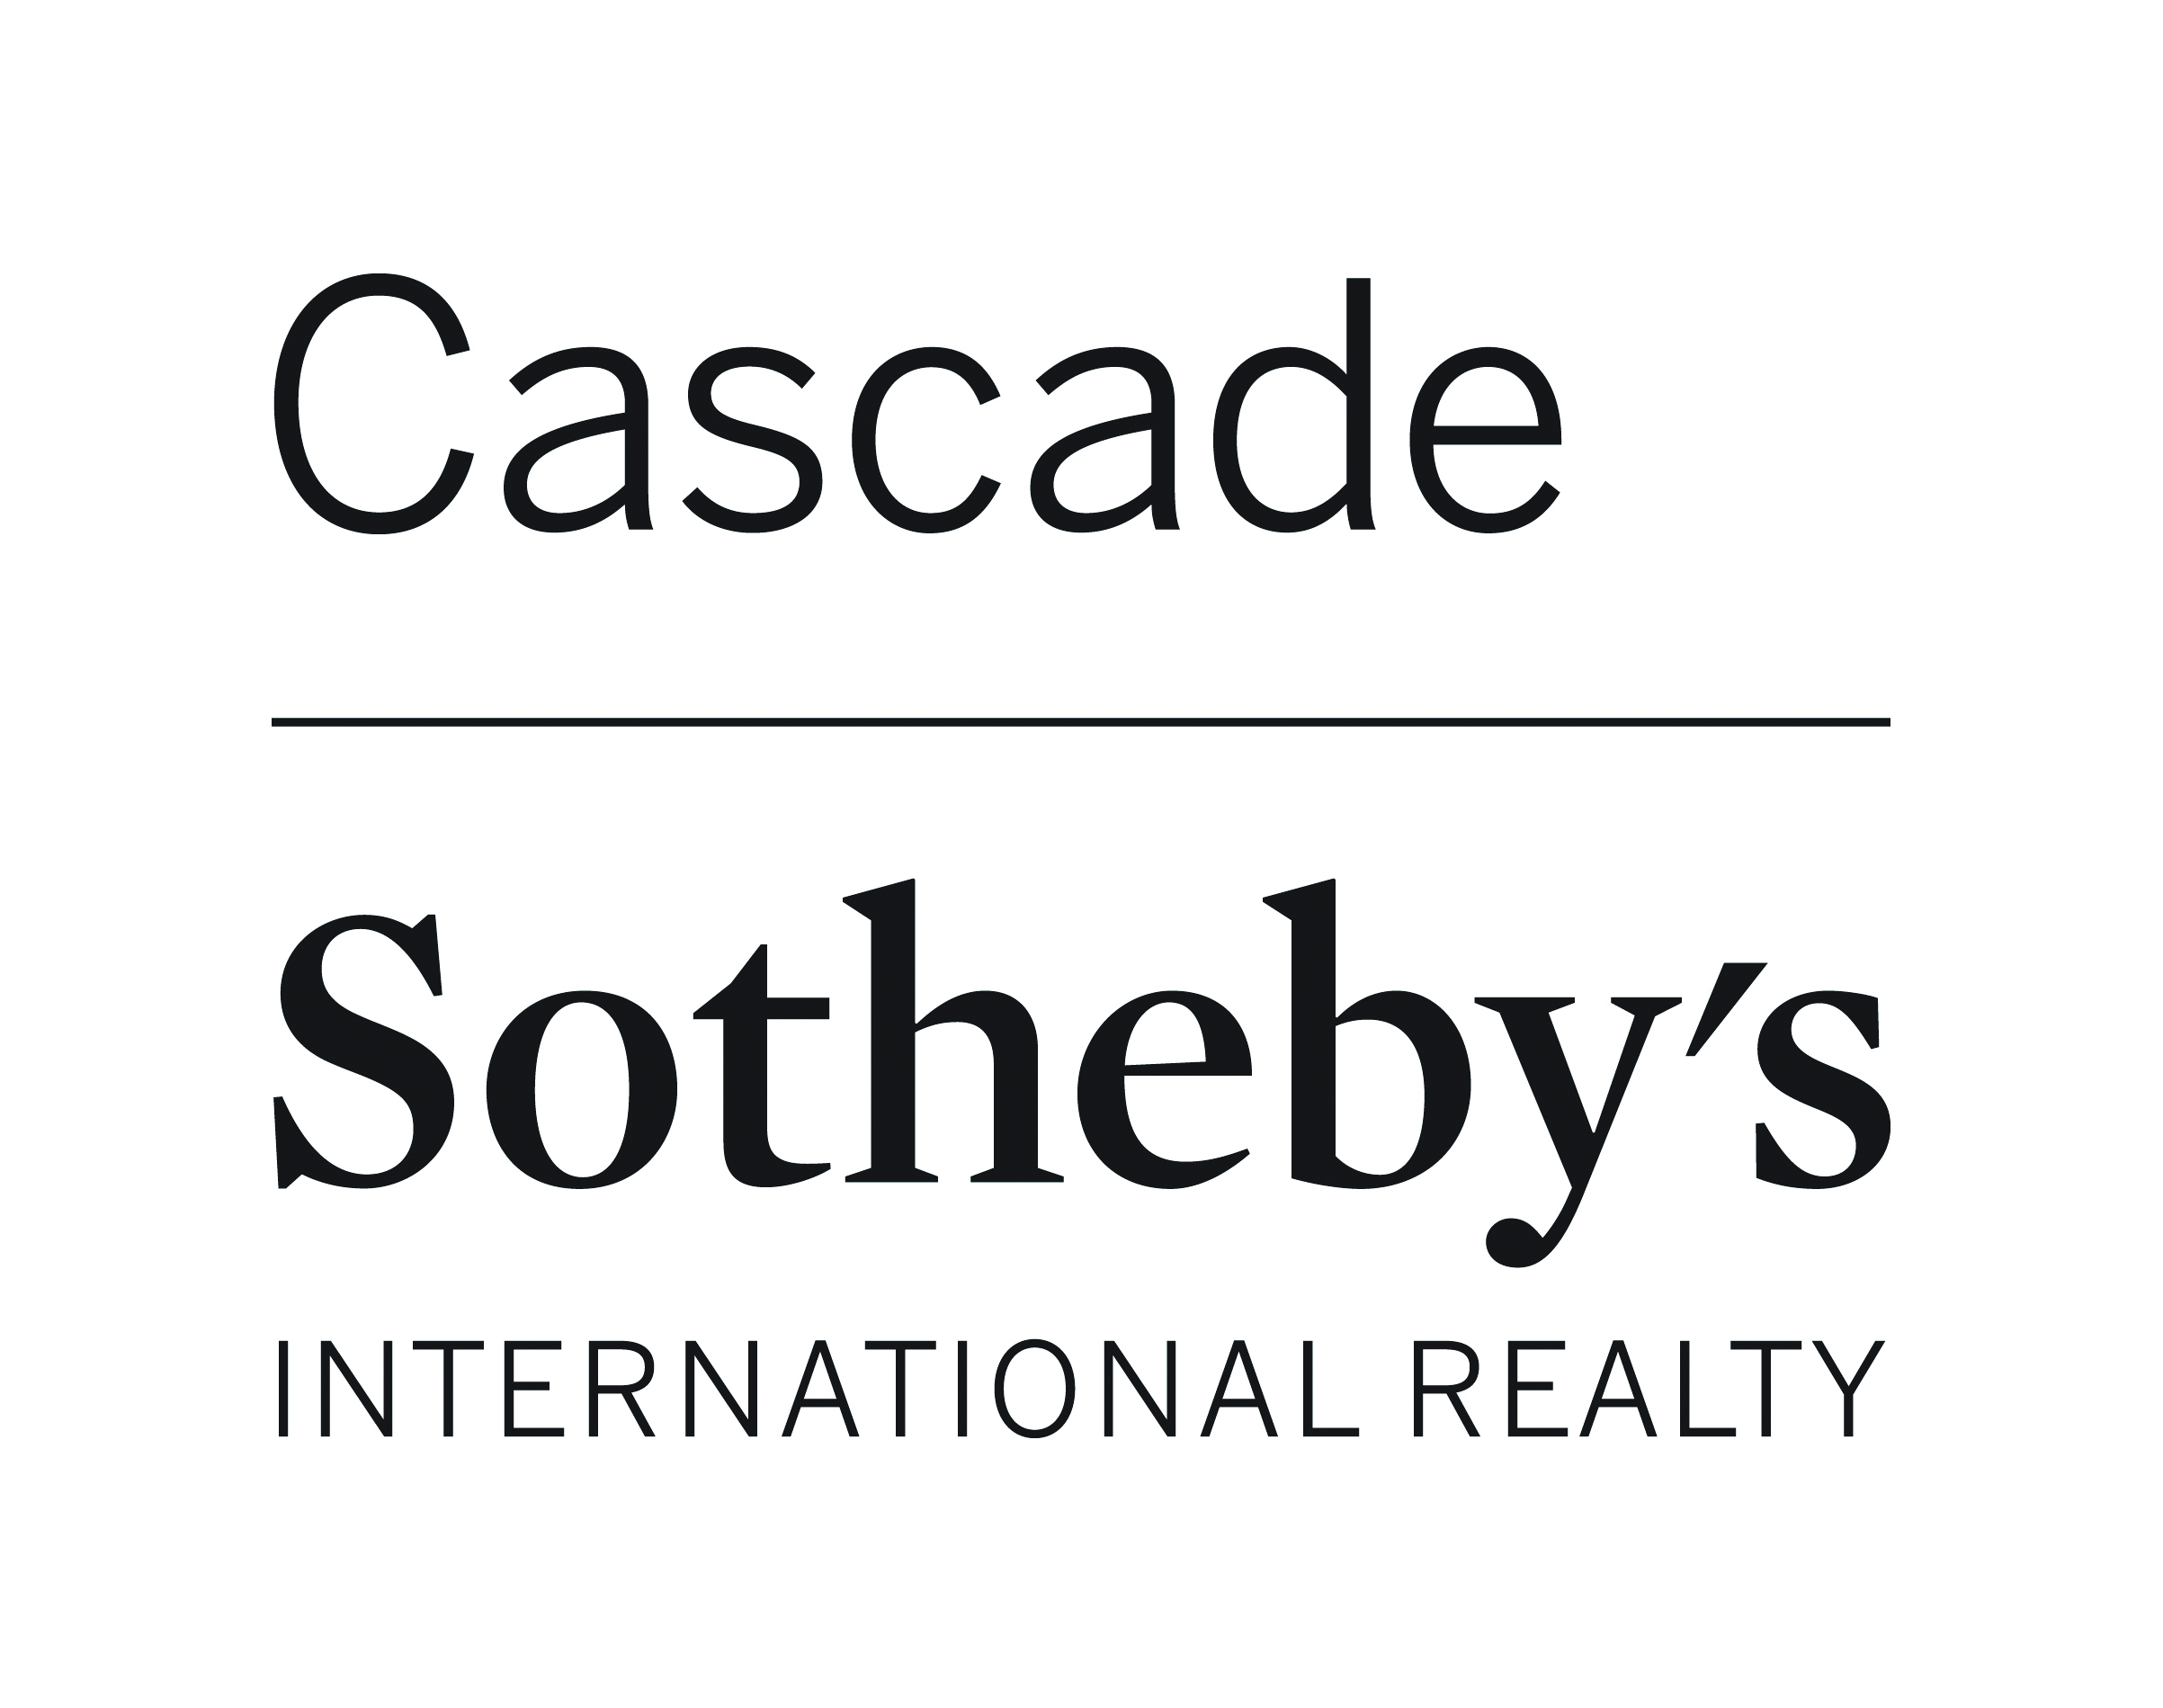 Cascade Sotheby's International Realty offers global marketing reach and tools for Oregon  real estate listings.